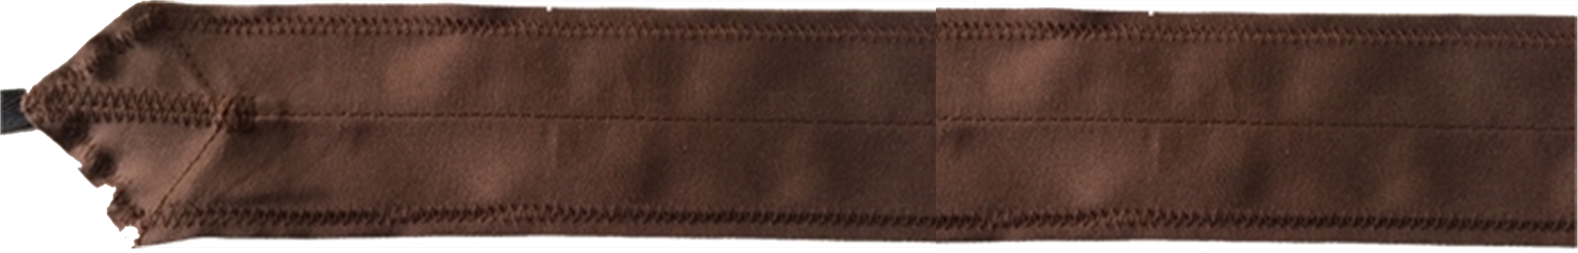 solid brown wrist wraps